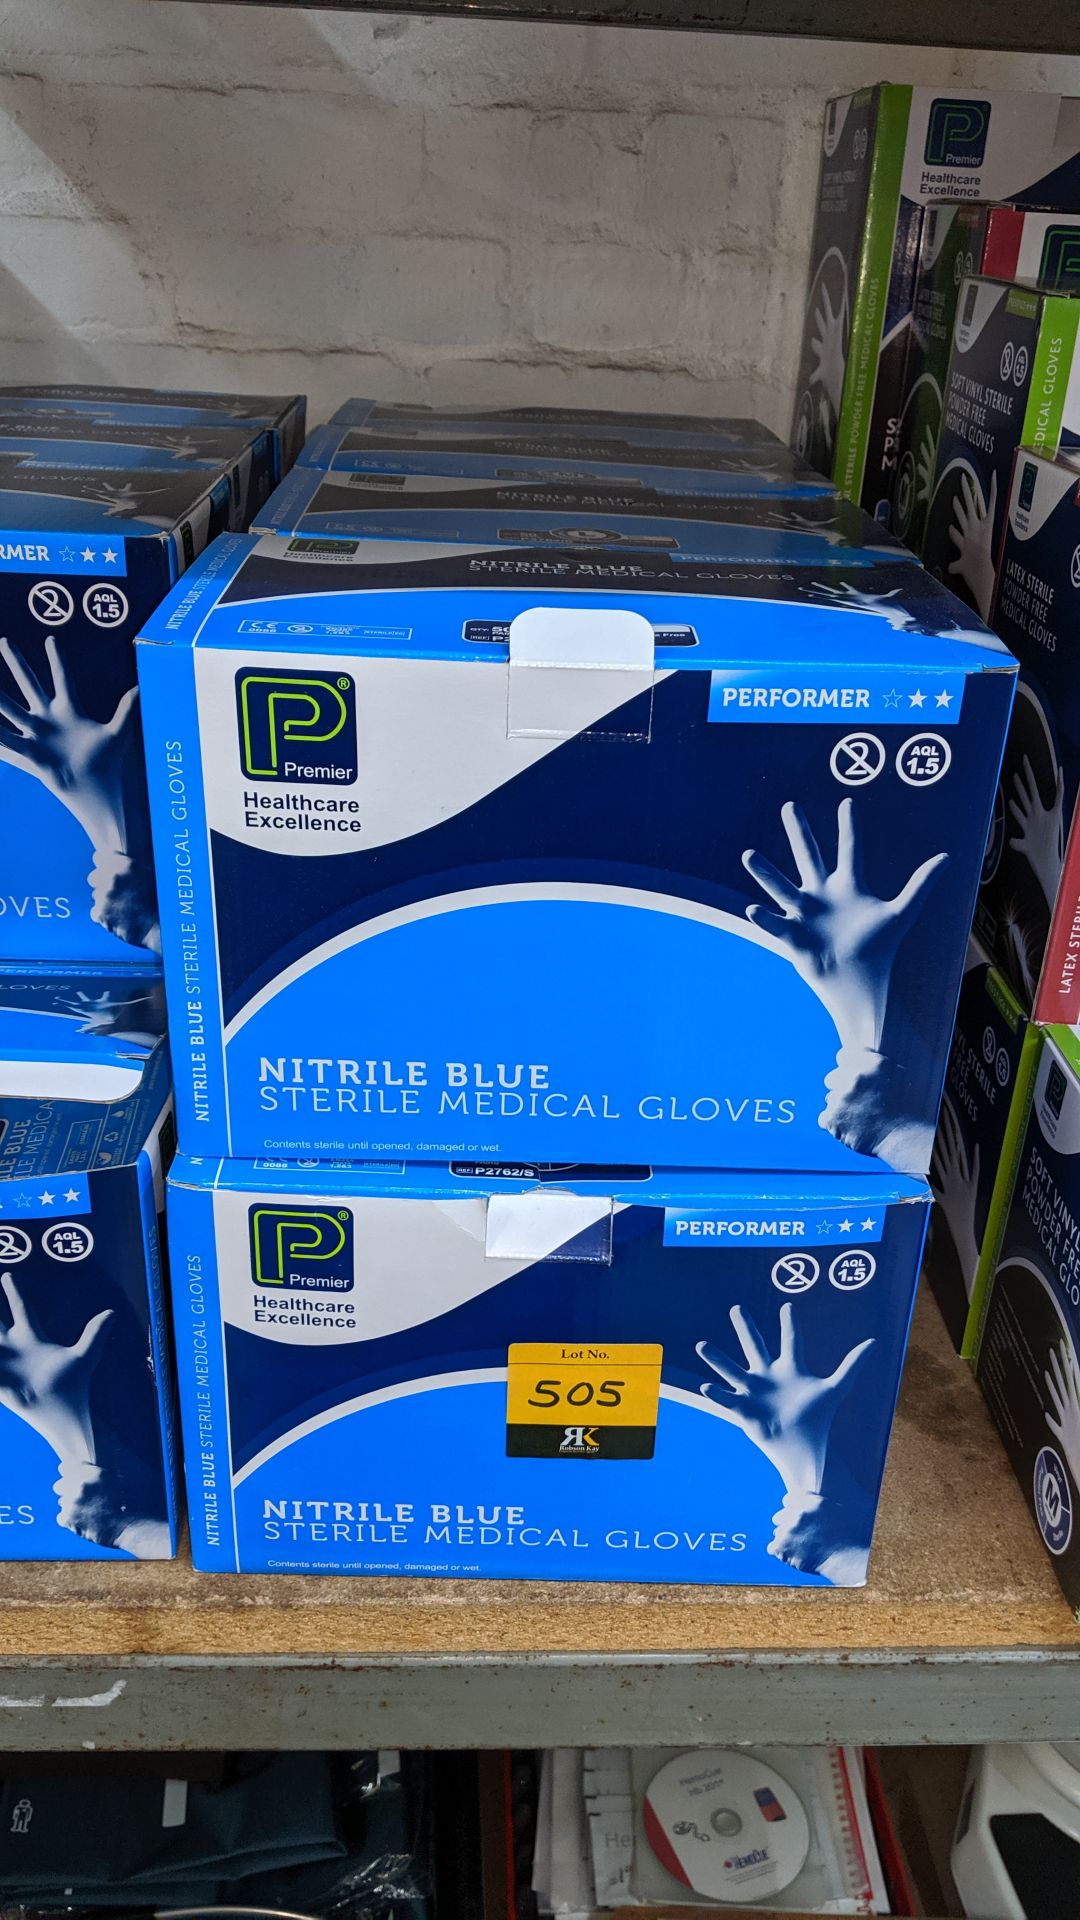 8 boxes of Nitrile blue sterile medical gloves. This is one of a large number of lots used/owned